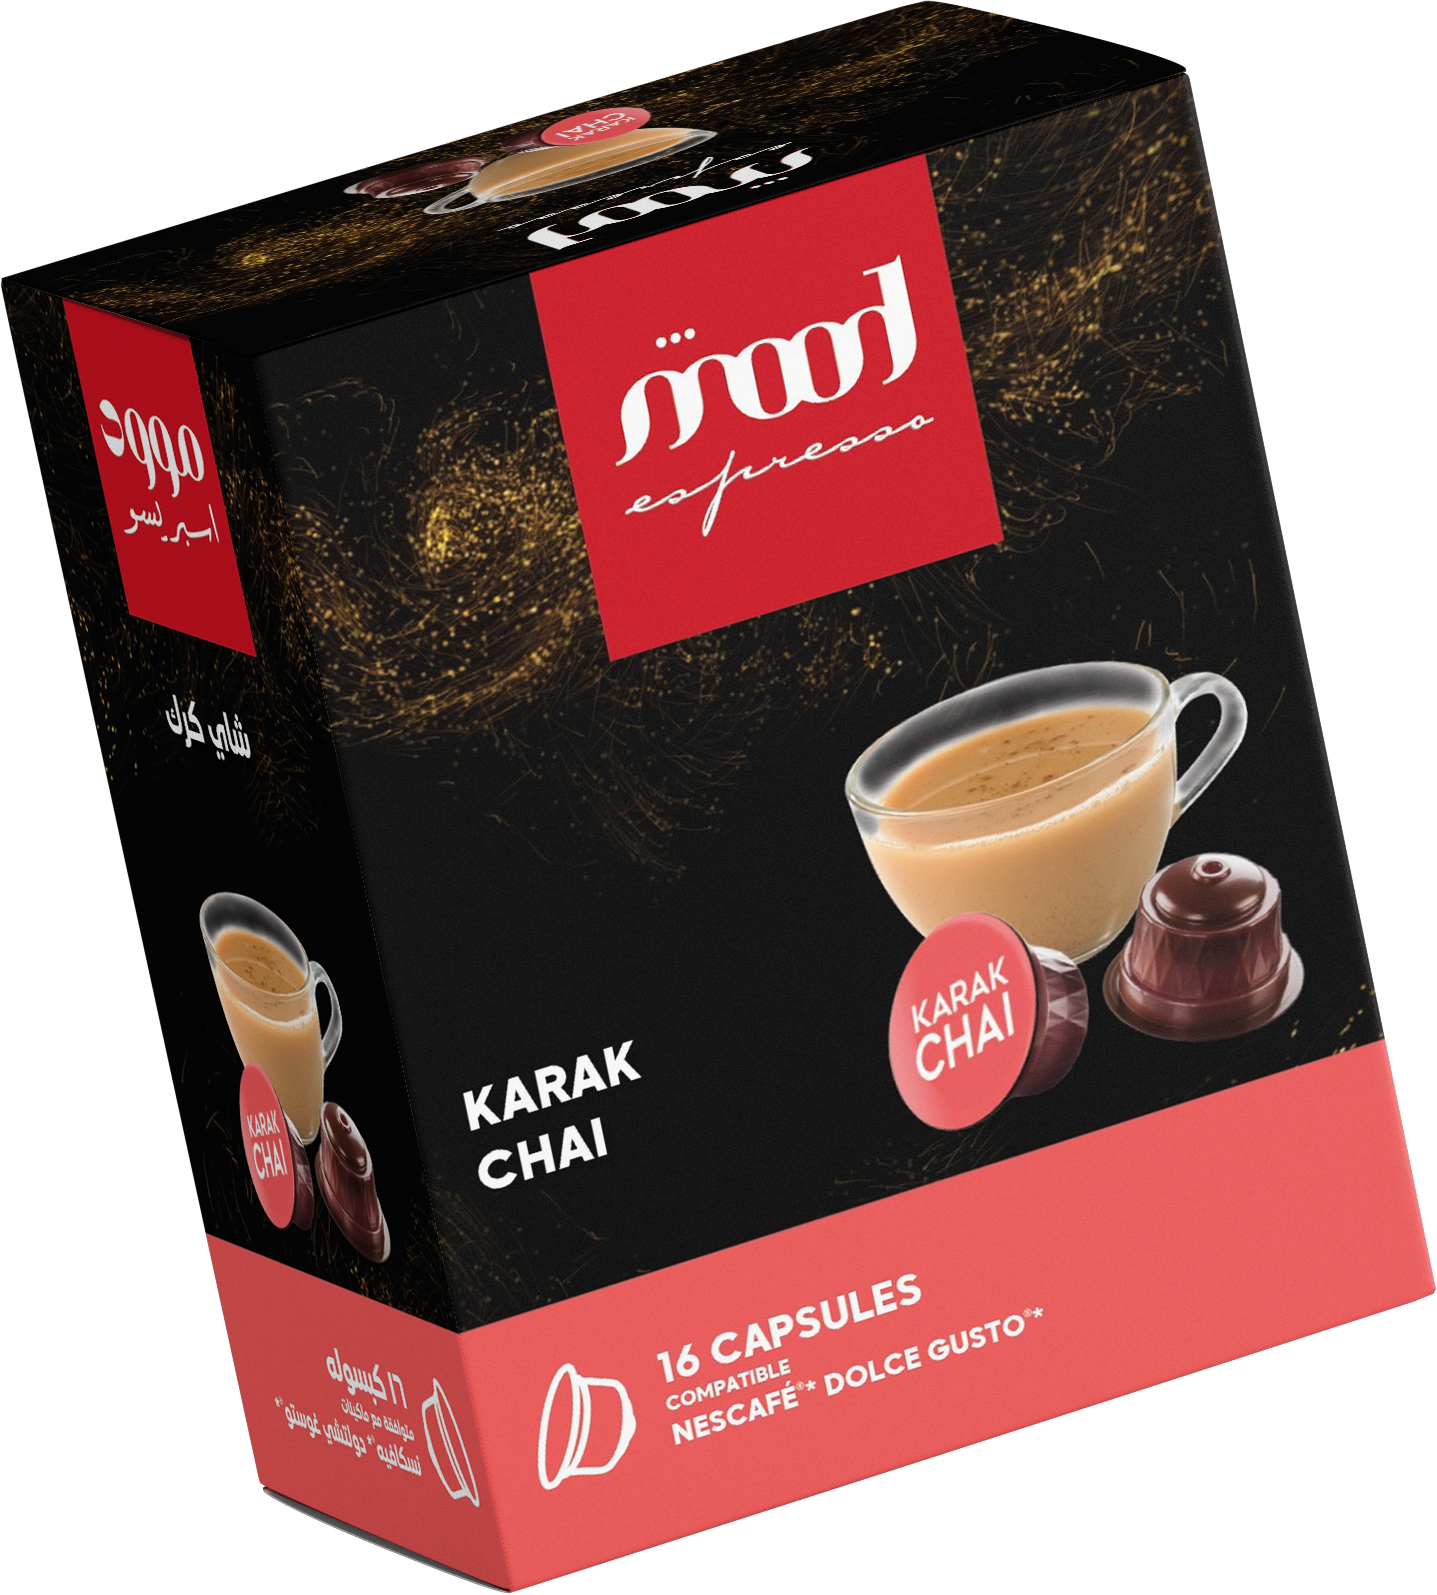 mood espresso - Dolce gusto nescafe offer bundle -pack of eight-pack of 8-dolce gusto Discovery pack-karak chai